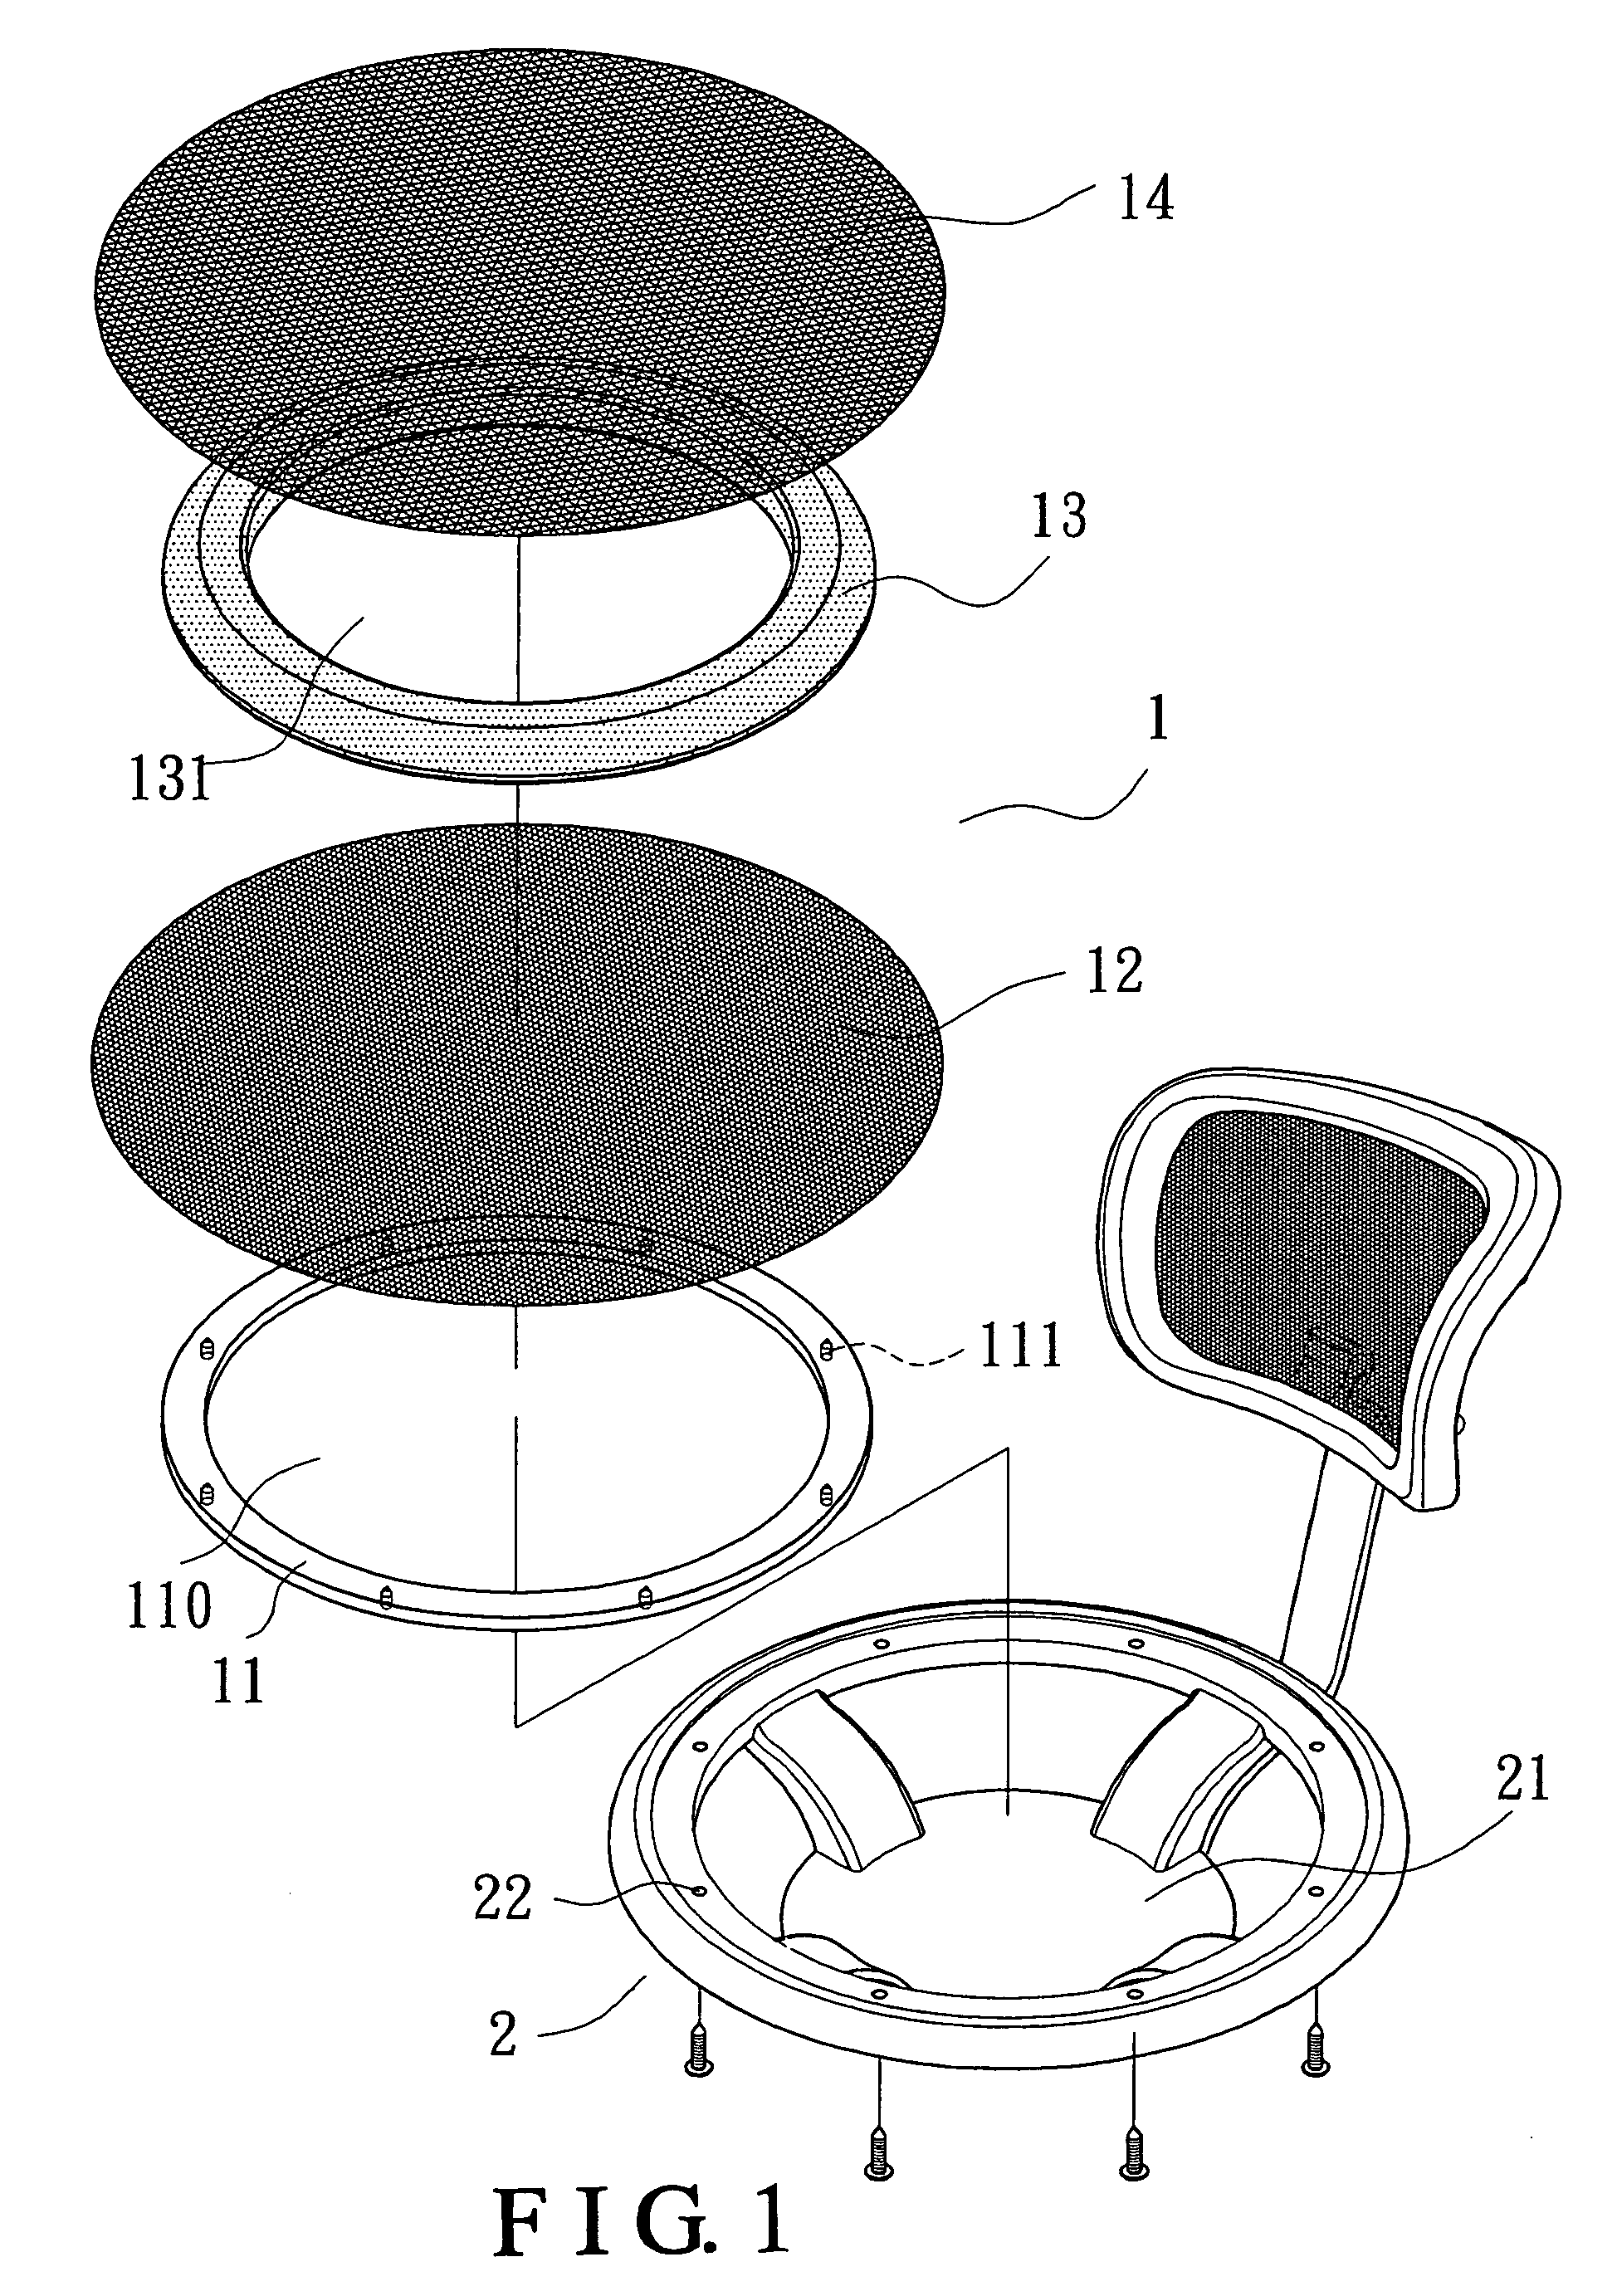 Structure of a double-mesh seat of a chair